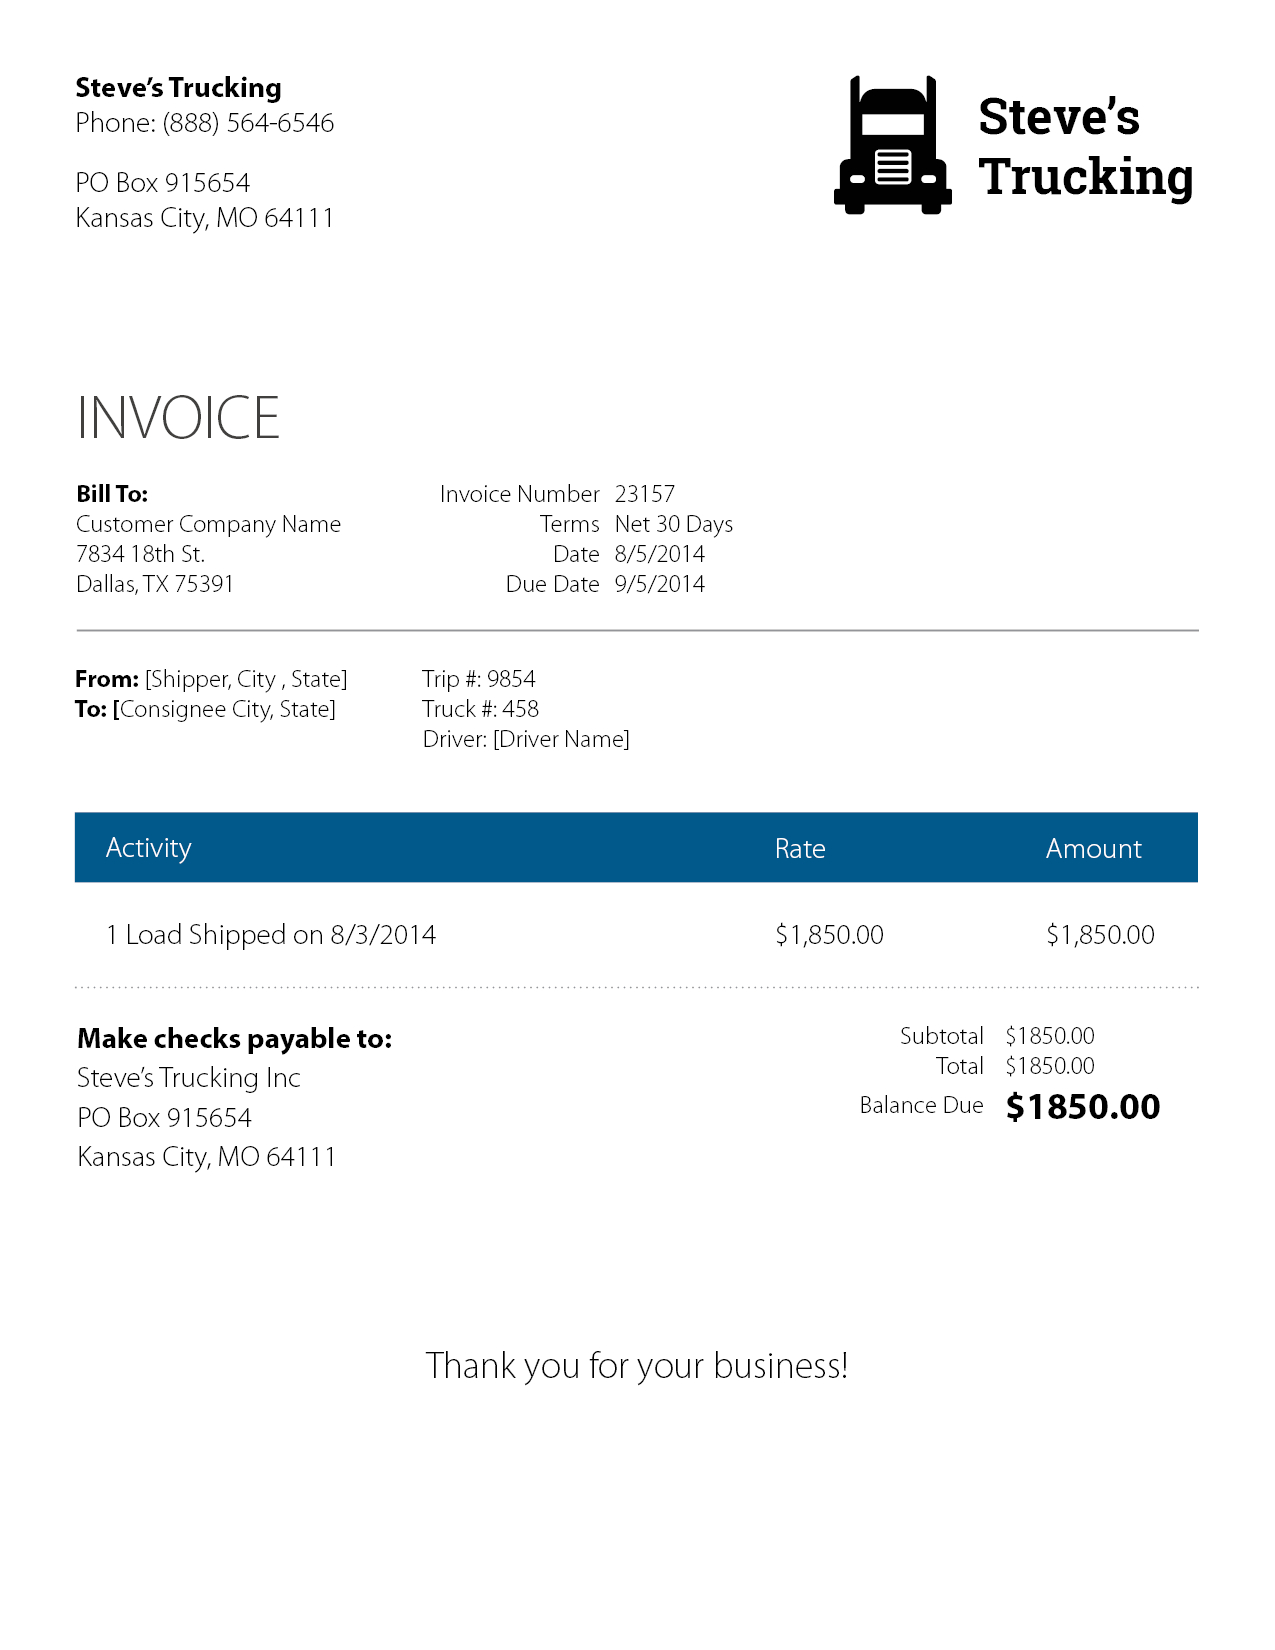 Eight Keys To A Rocksolid Trucking Invoice  Rts Financial pertaining to Trucking Company Invoice Template